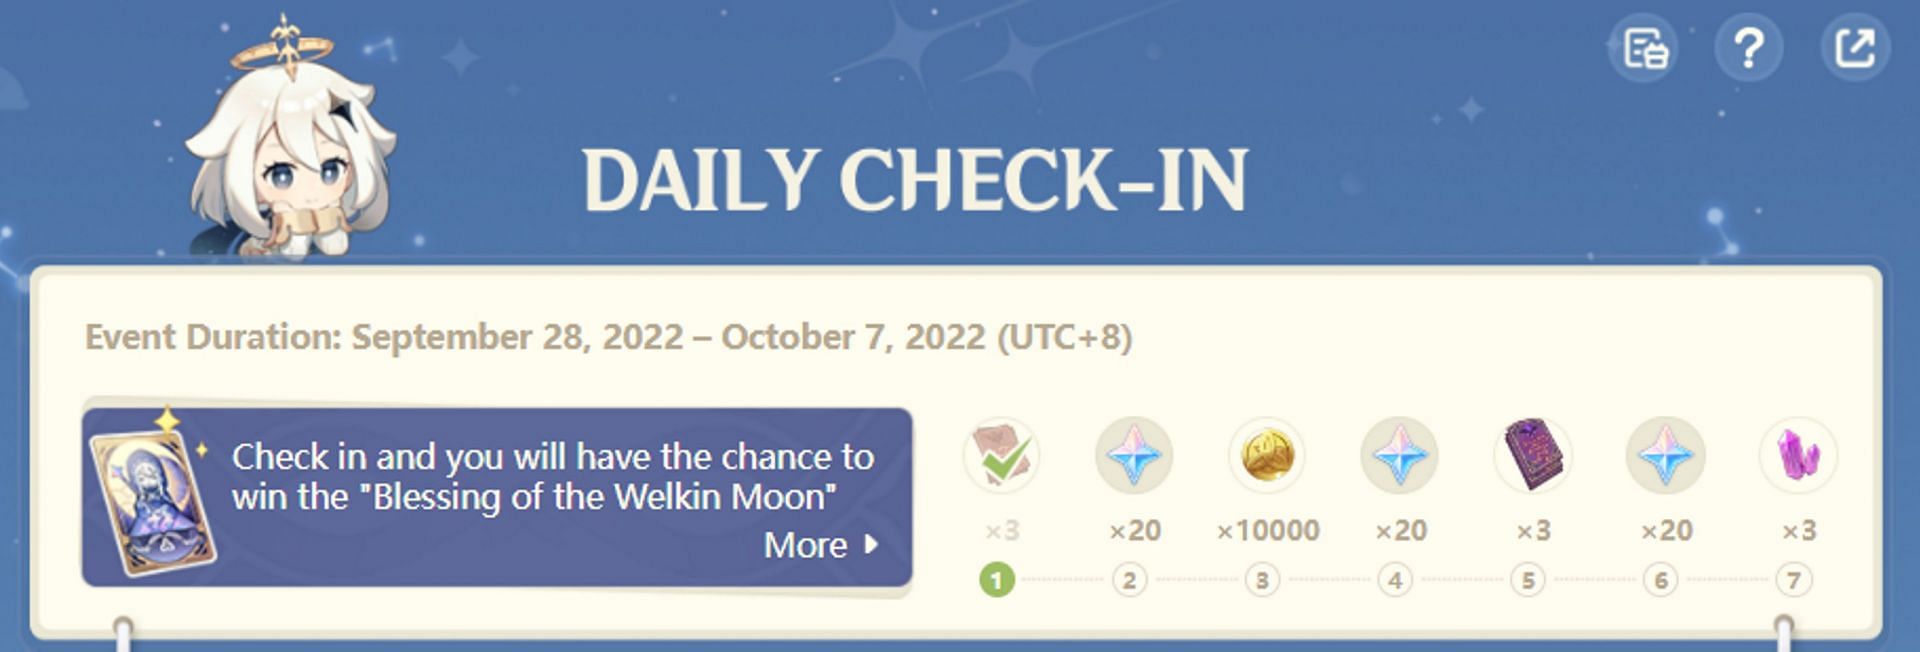 The Daily Check-In Page (Image via HoYoverse)